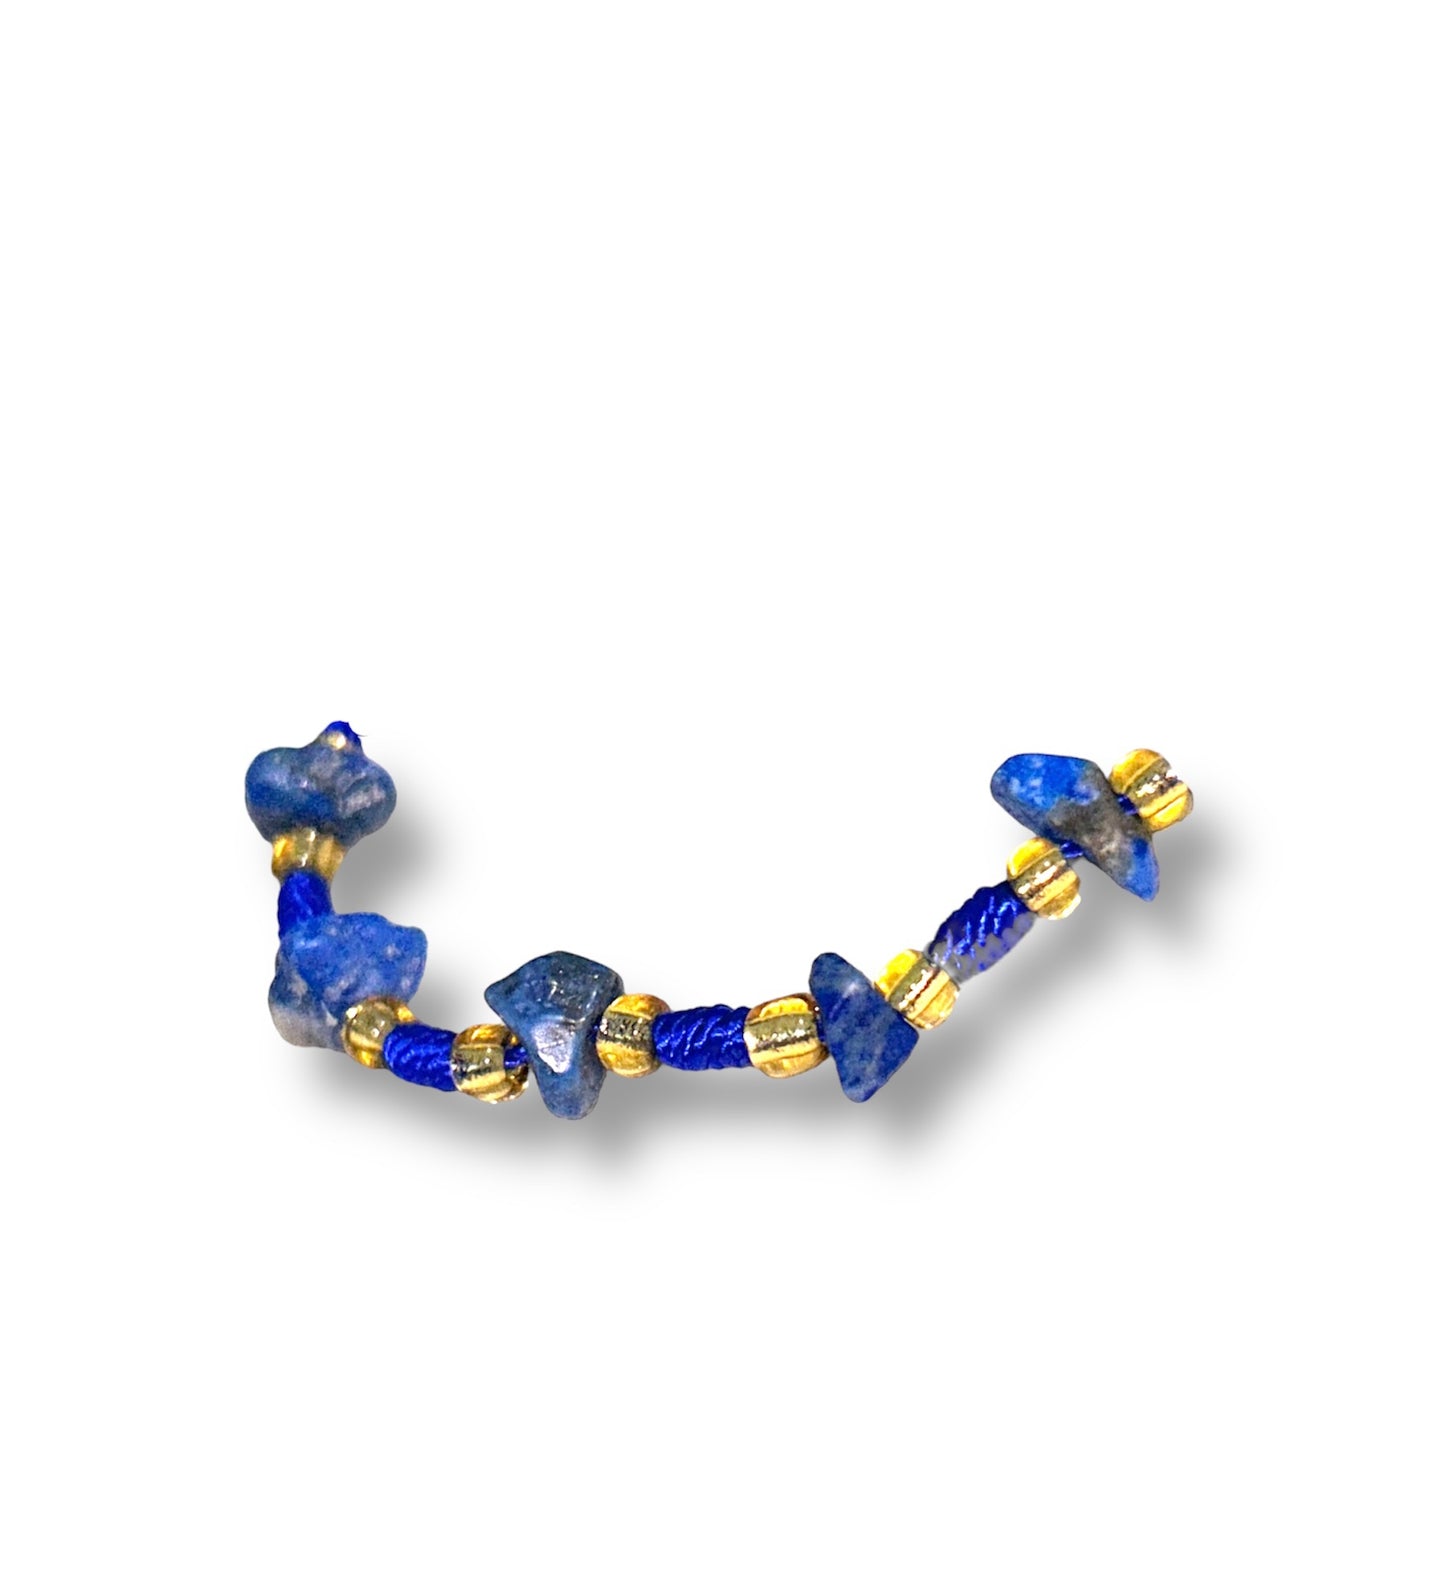 Vibrant Blue String Bracelet with Lapis Lazuli Stones and Beads for Inner Peace